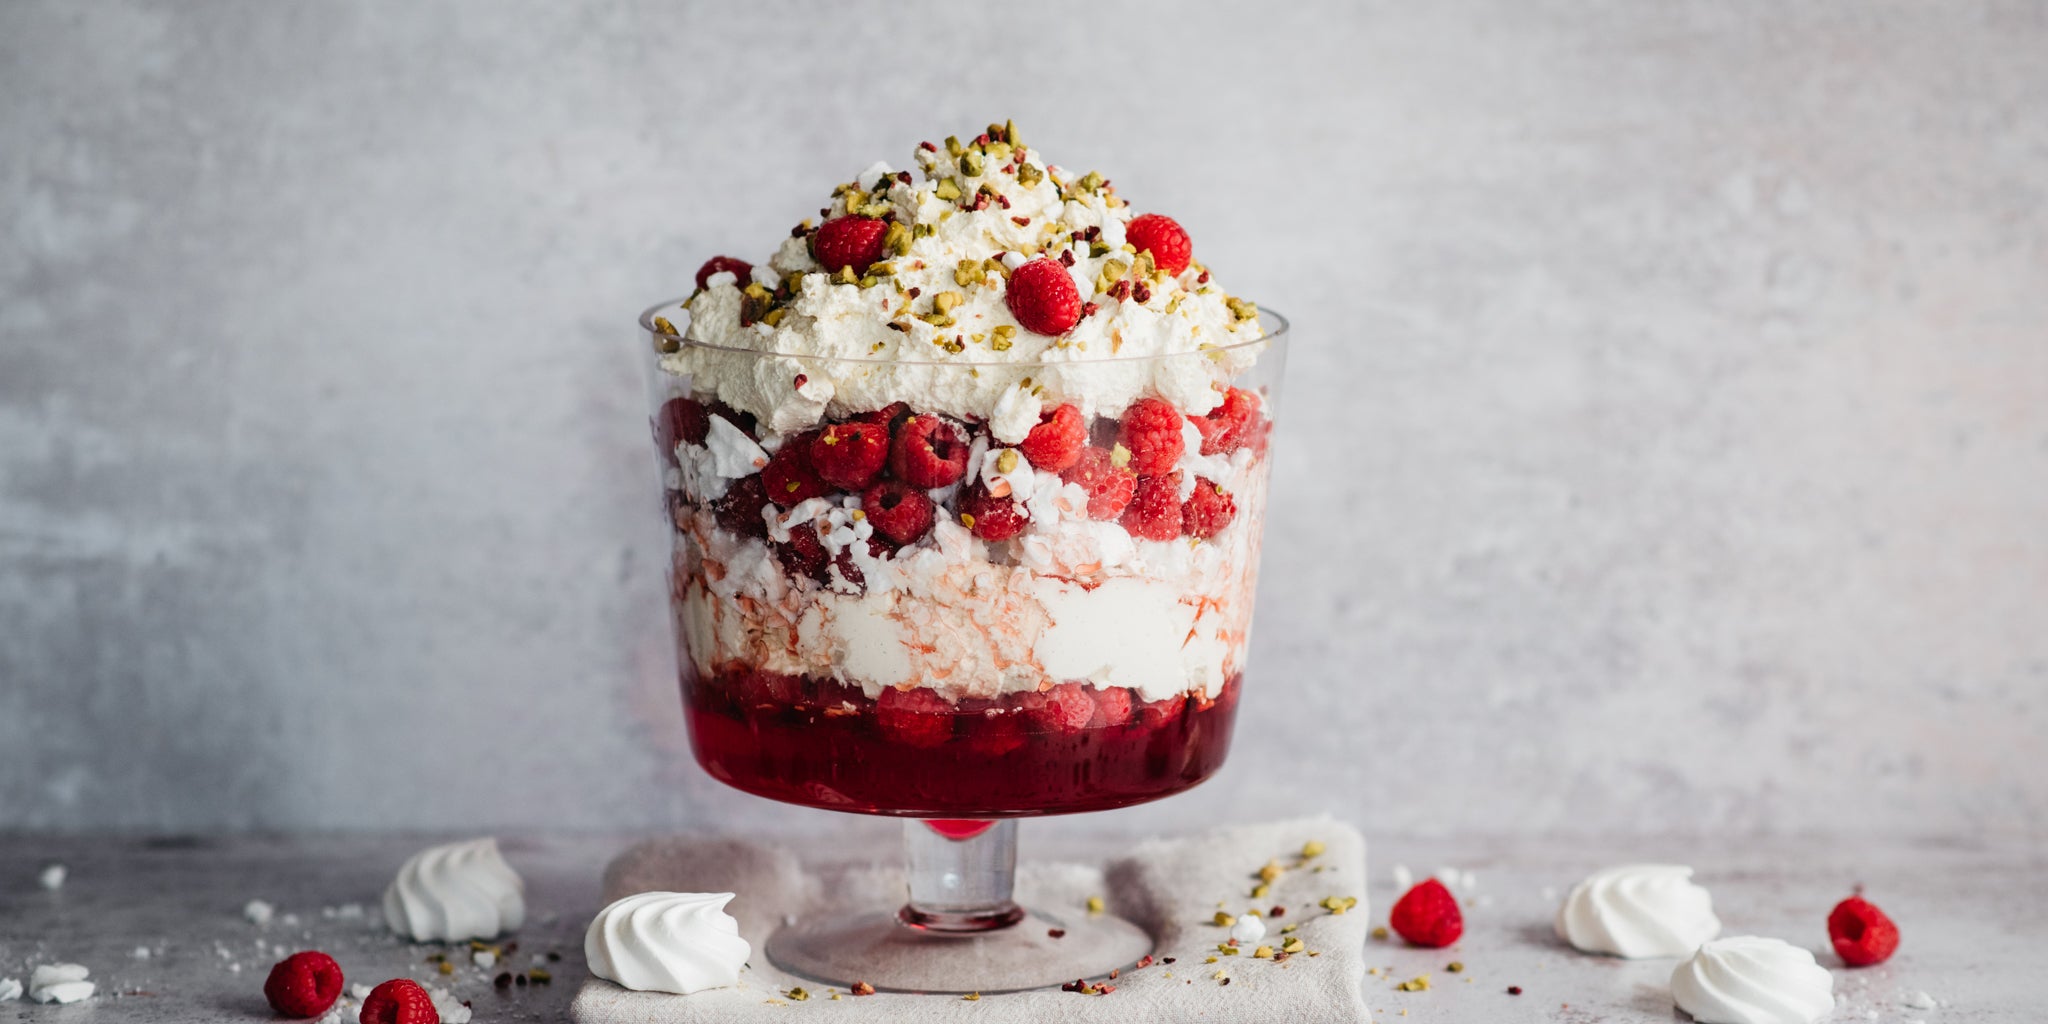 Eton Mess Trifle topped with meringue and fresh raspberries